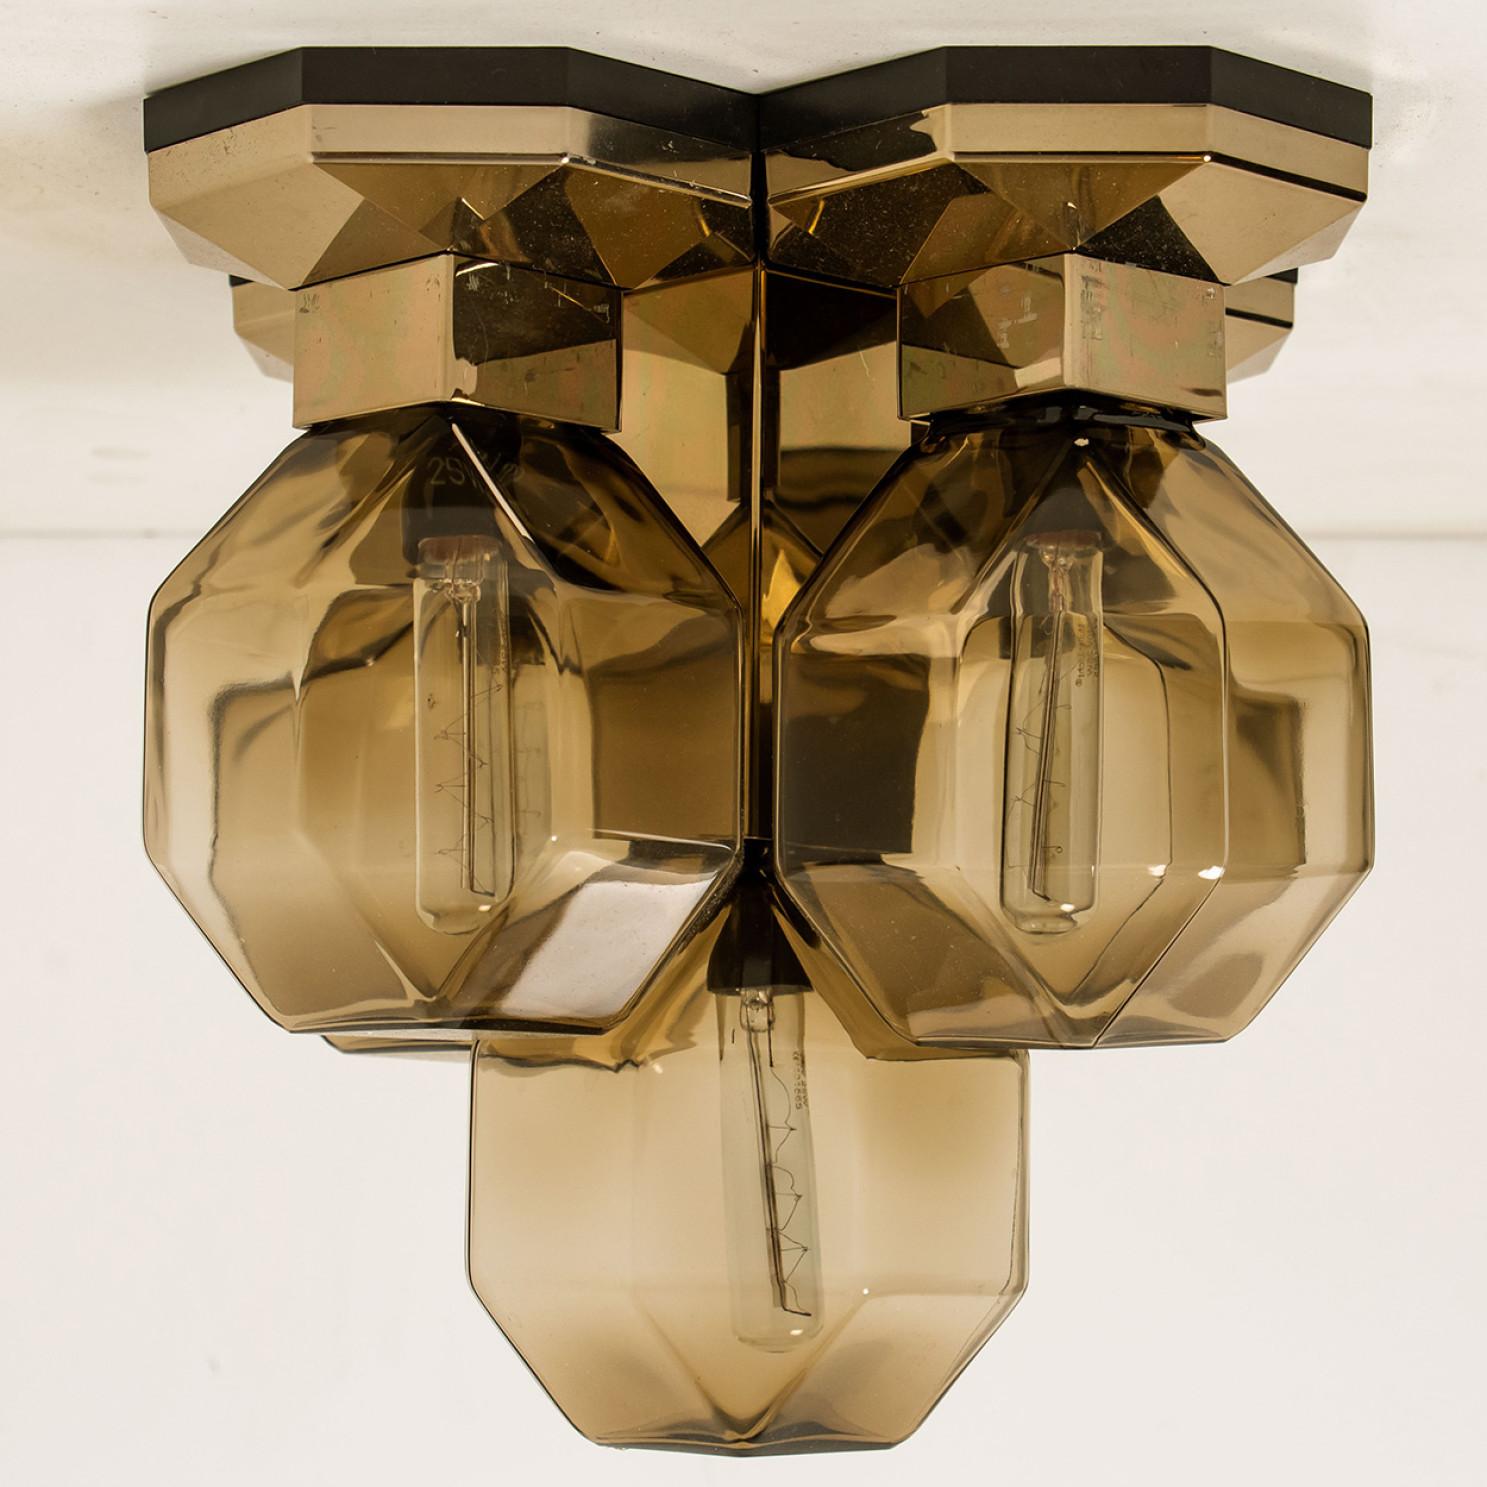 Post-Modern Smoked Glass Wall or Ceiling Lamp by Motoko Ishii for Staff, 1970s For Sale